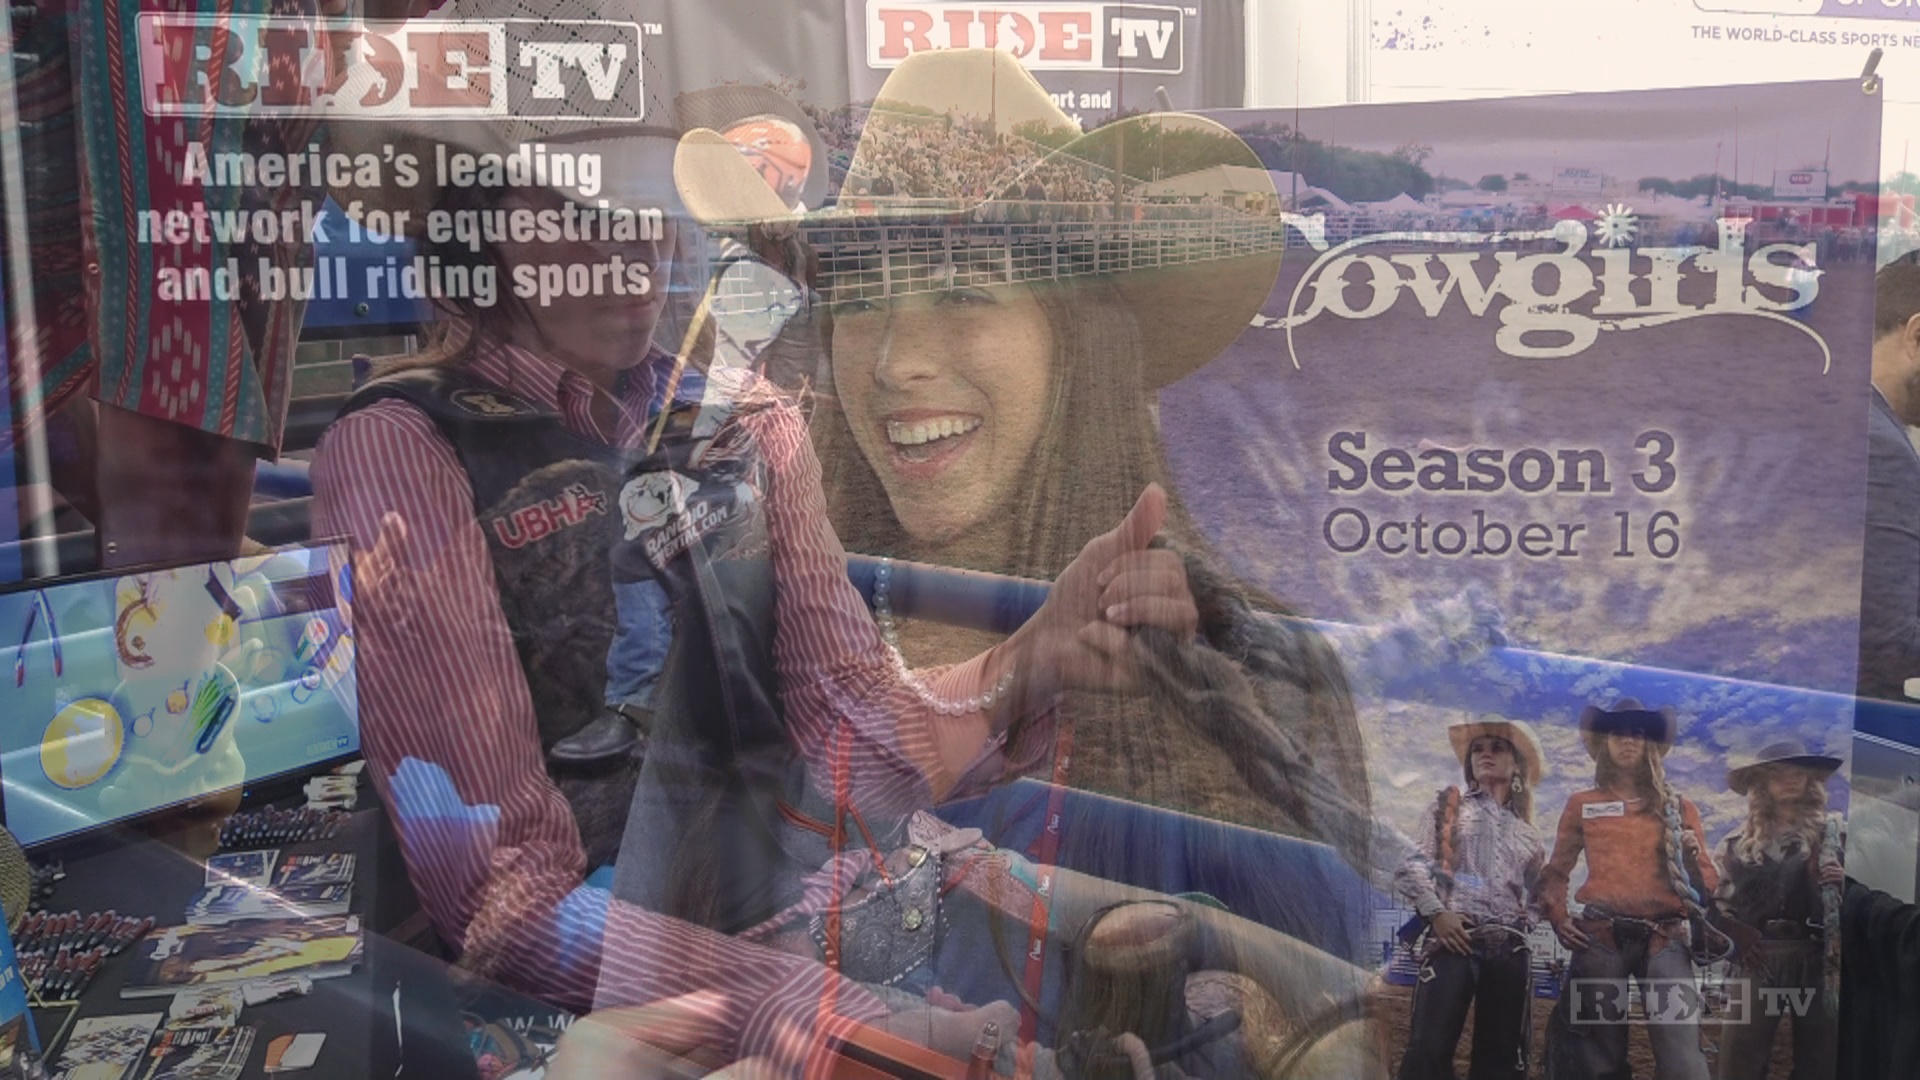 Sarah Brown of RIDETV explaining how she went from cheerleader to rodeo champion.